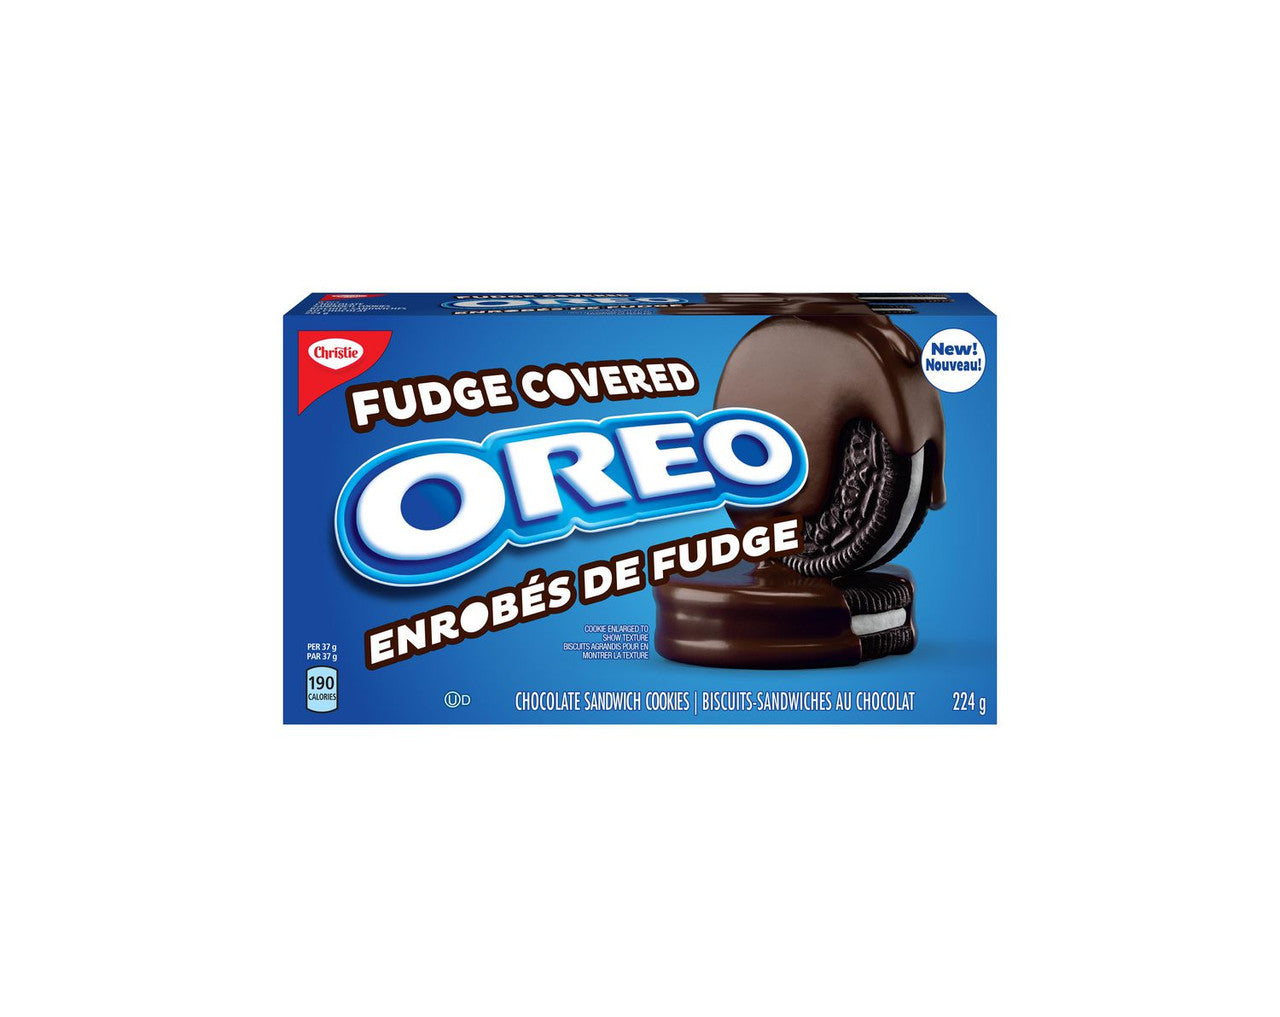 Christie Oreo Fudge Covered Cookies, 224g/7.9oz., (Imported from Canada)